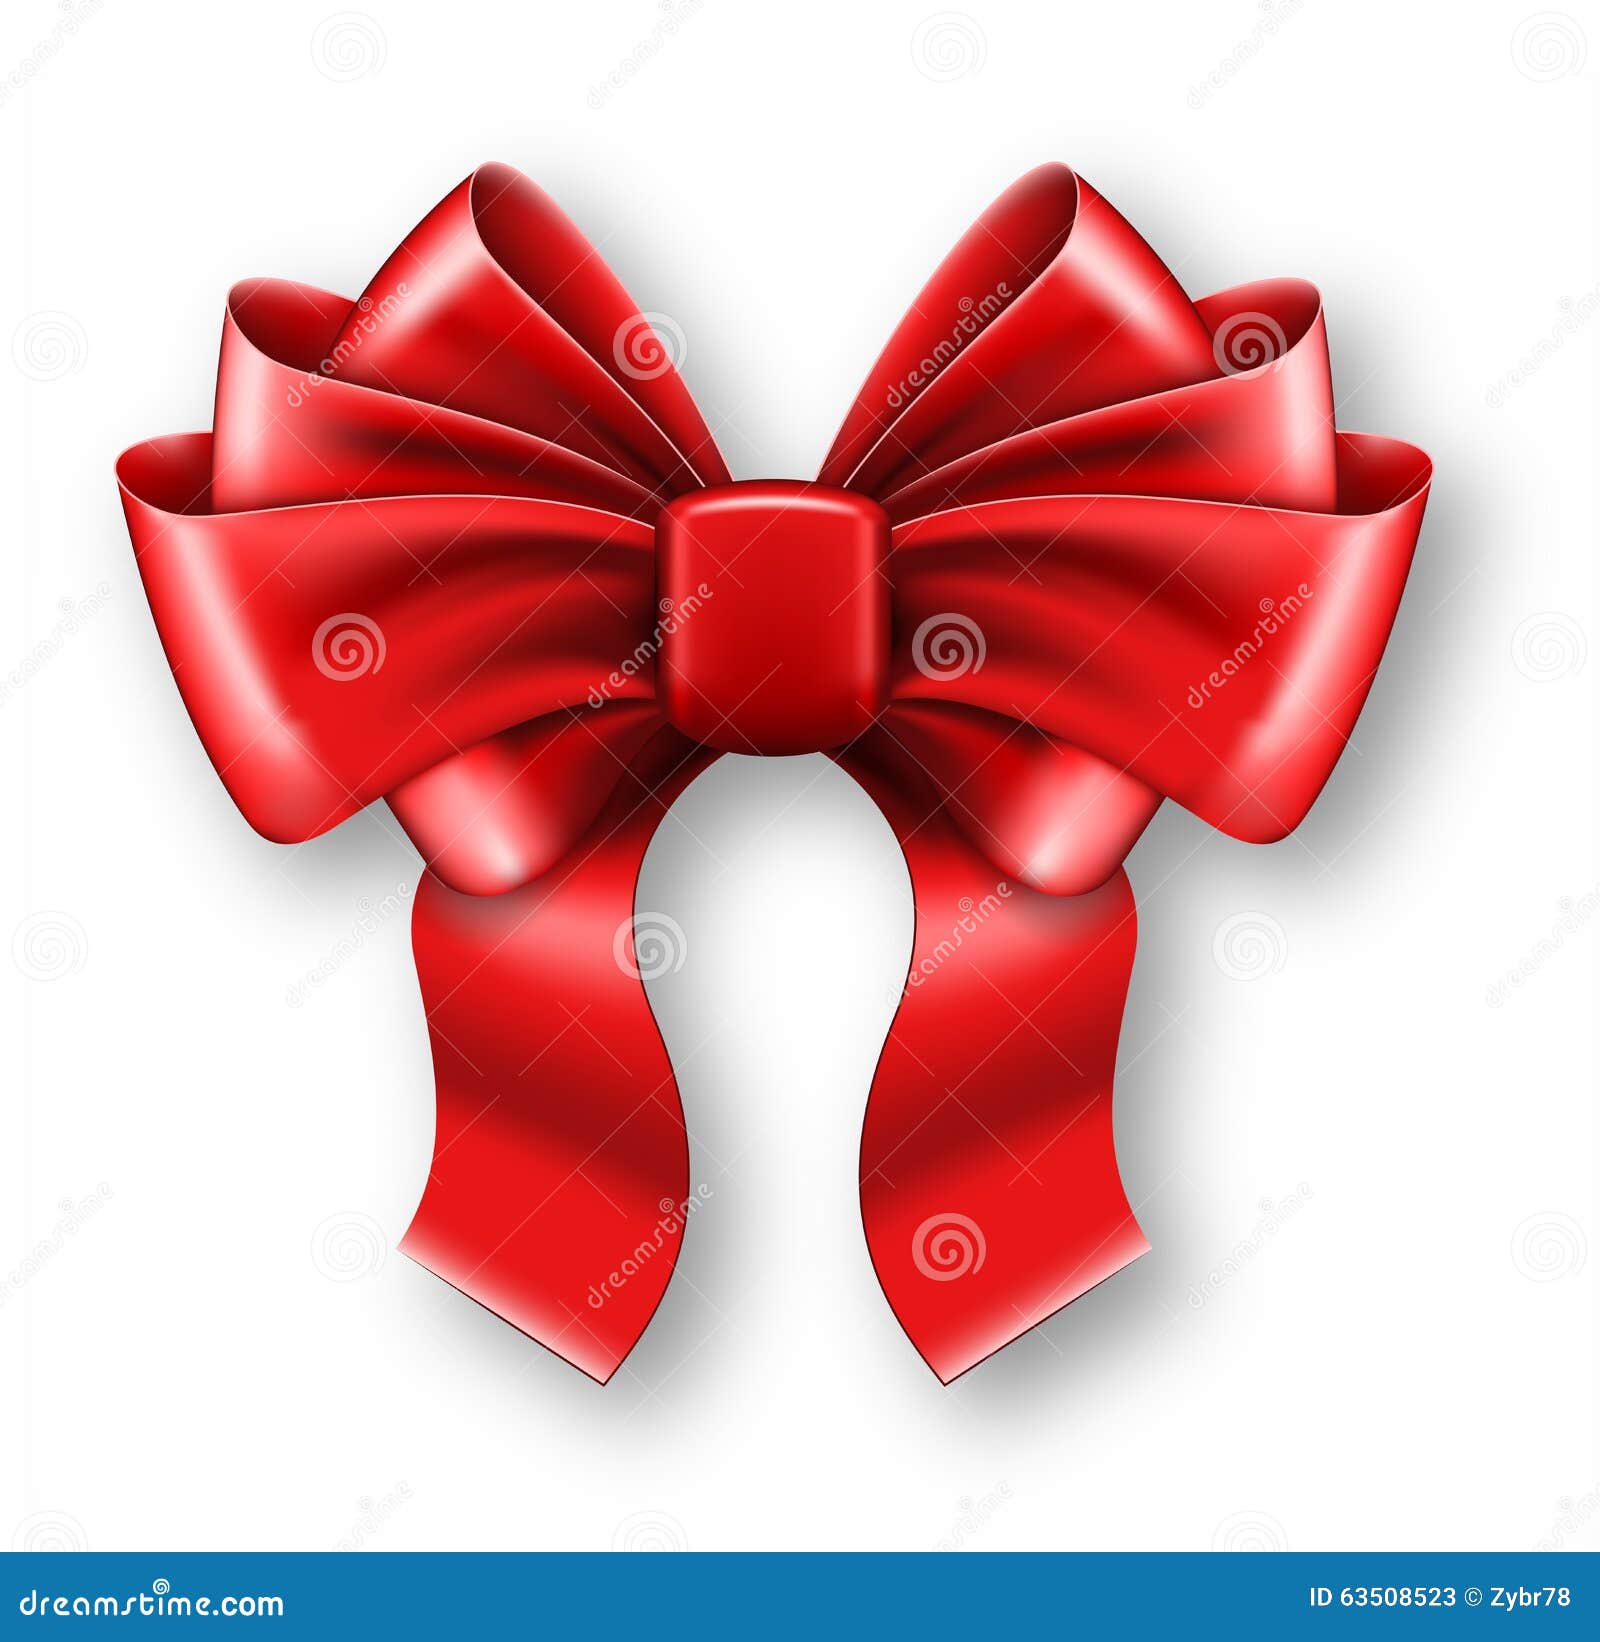 big red bow clipart - photo #46